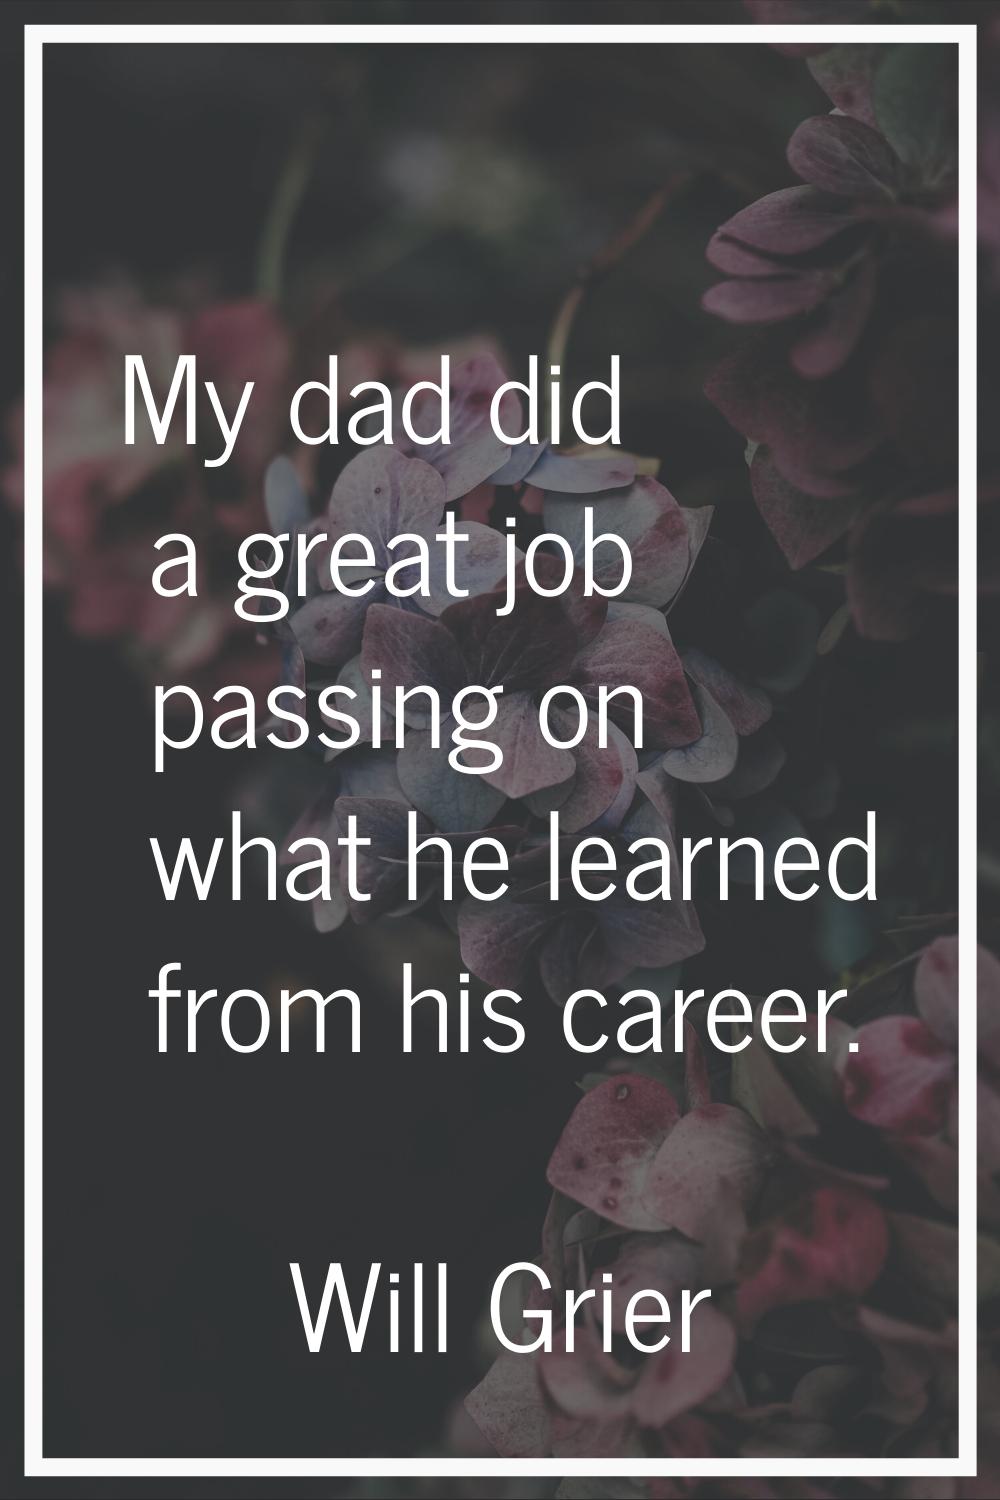 My dad did a great job passing on what he learned from his career.